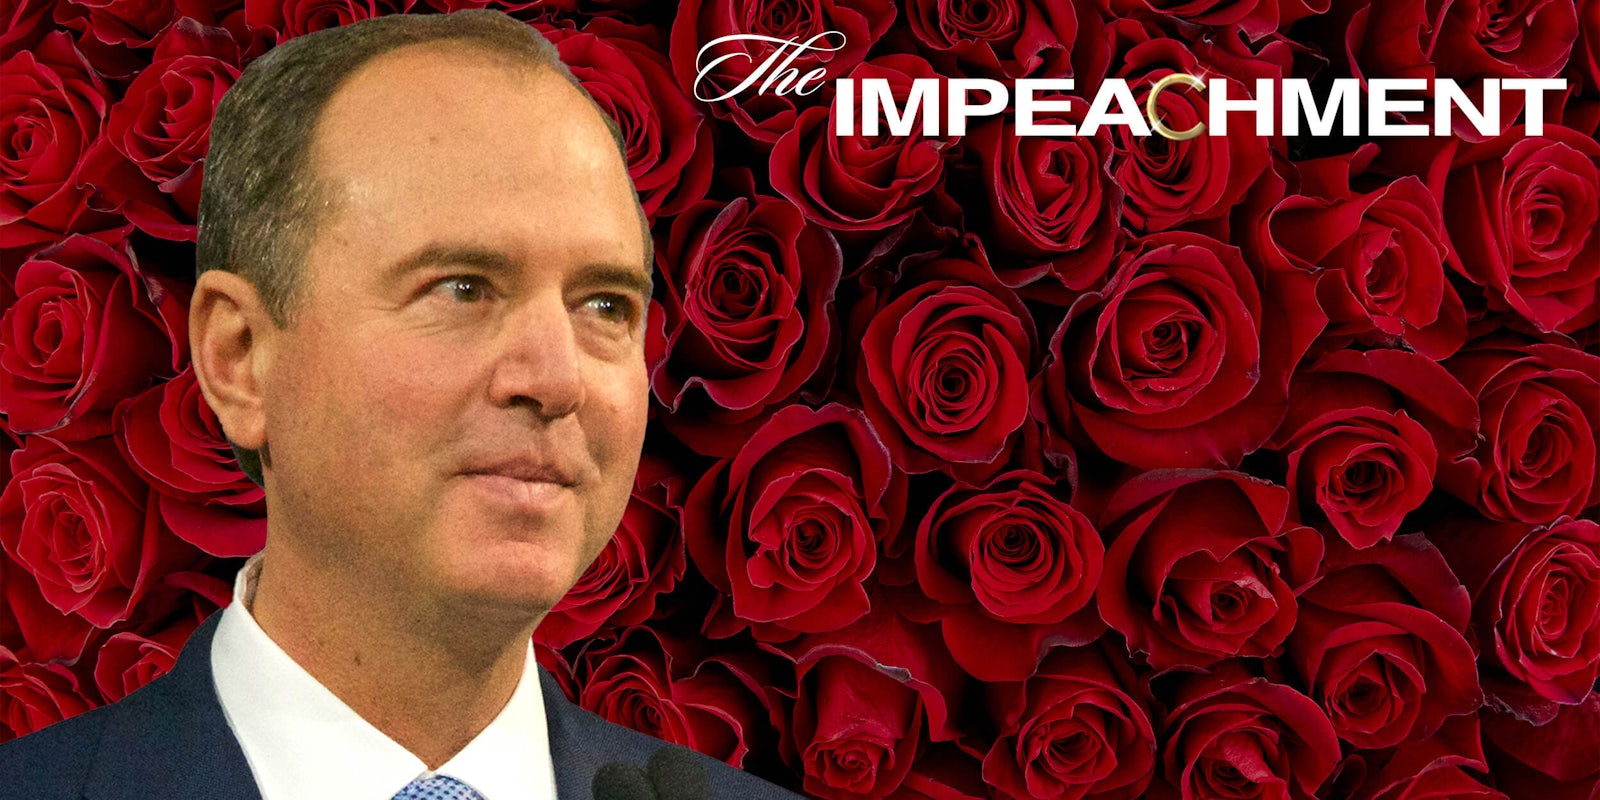 Adam Schiff over rose background with 'The Impeachment' as The Bachelor logo